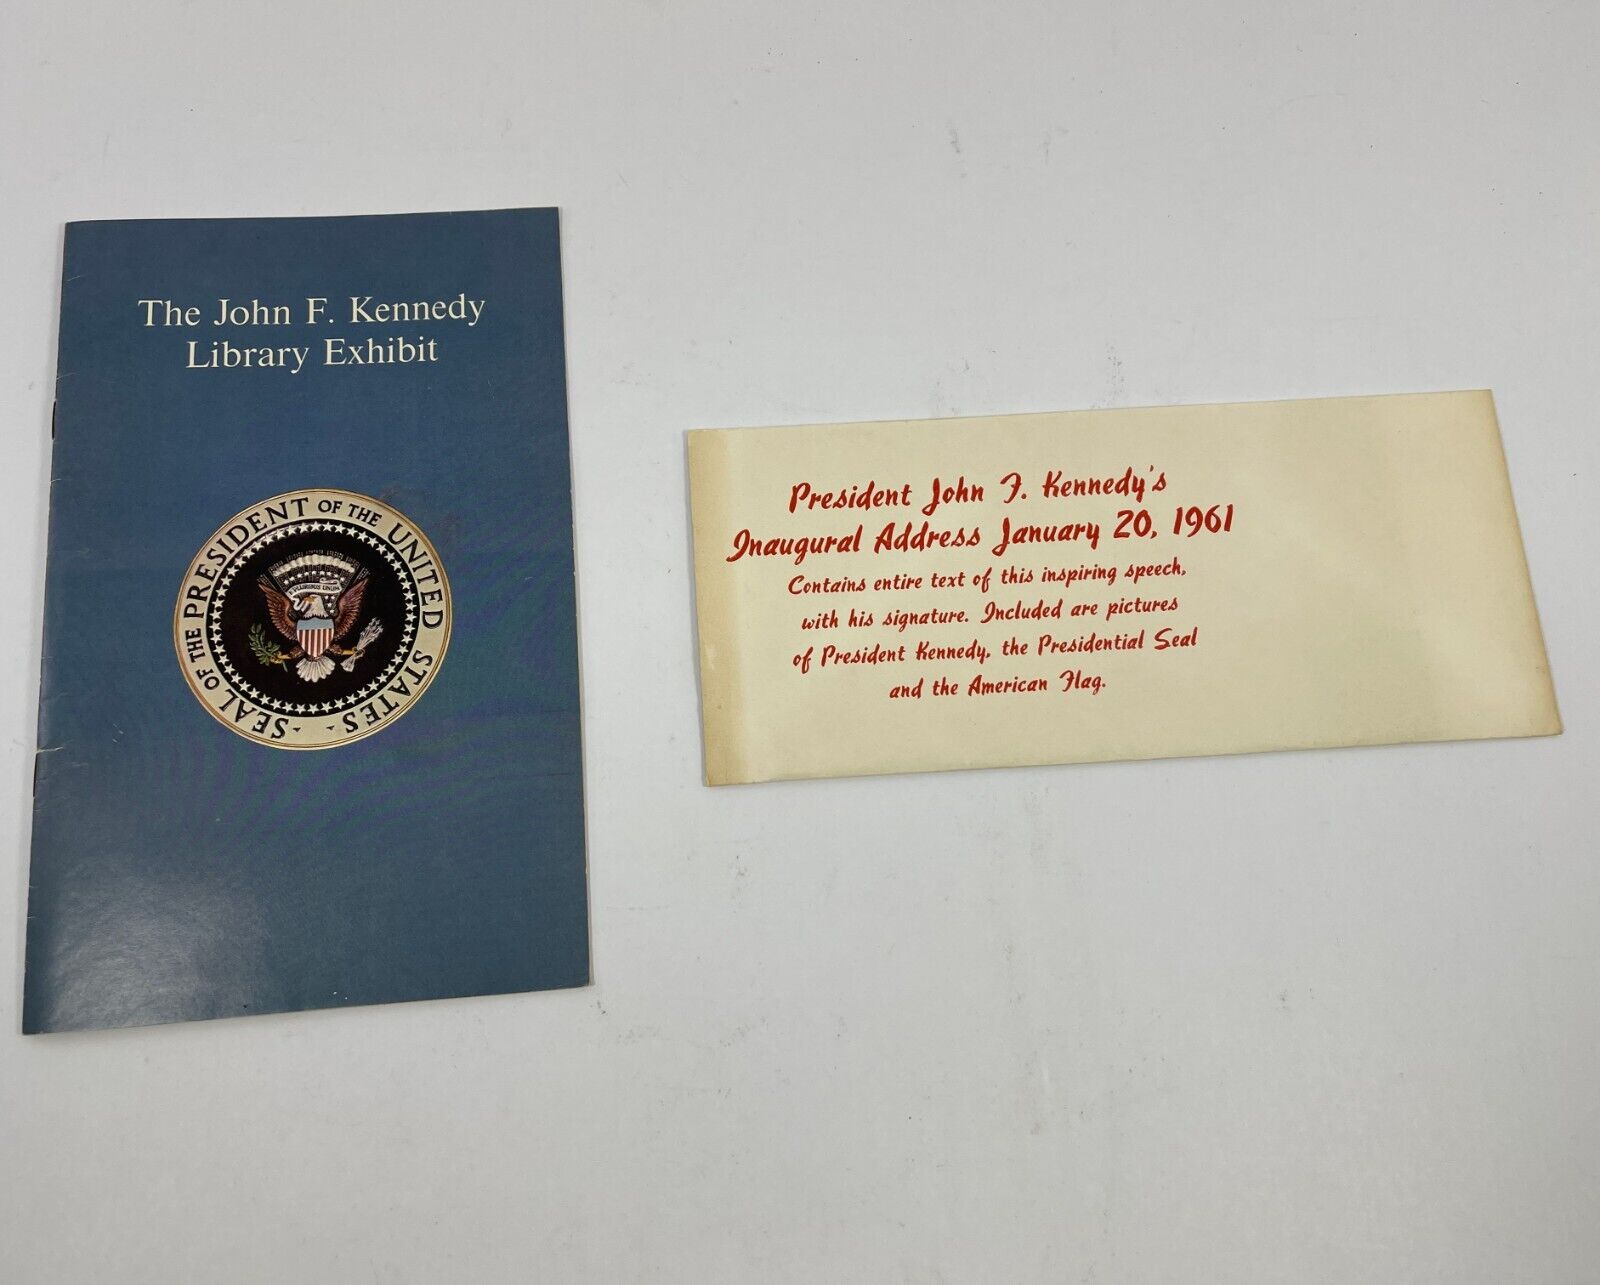 The John F. Kennedy Library Exhibit Brochure / Pamphlet 1960's Inaugural Address